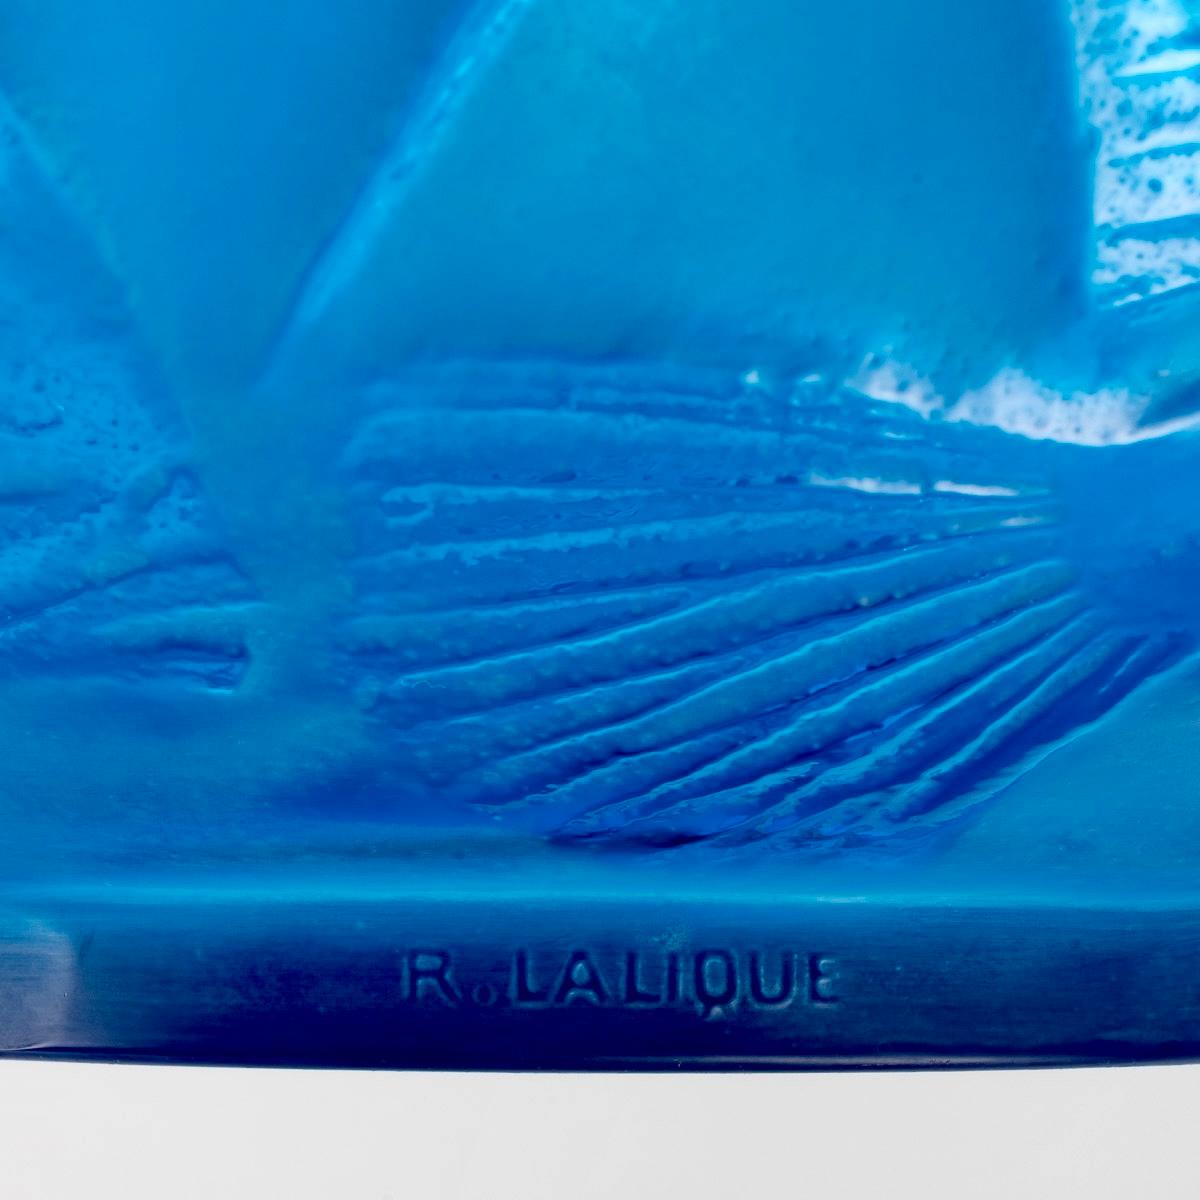 French 1921 René Lalique Poissons Vase Electric Blue Glass with White Patina, Fishes